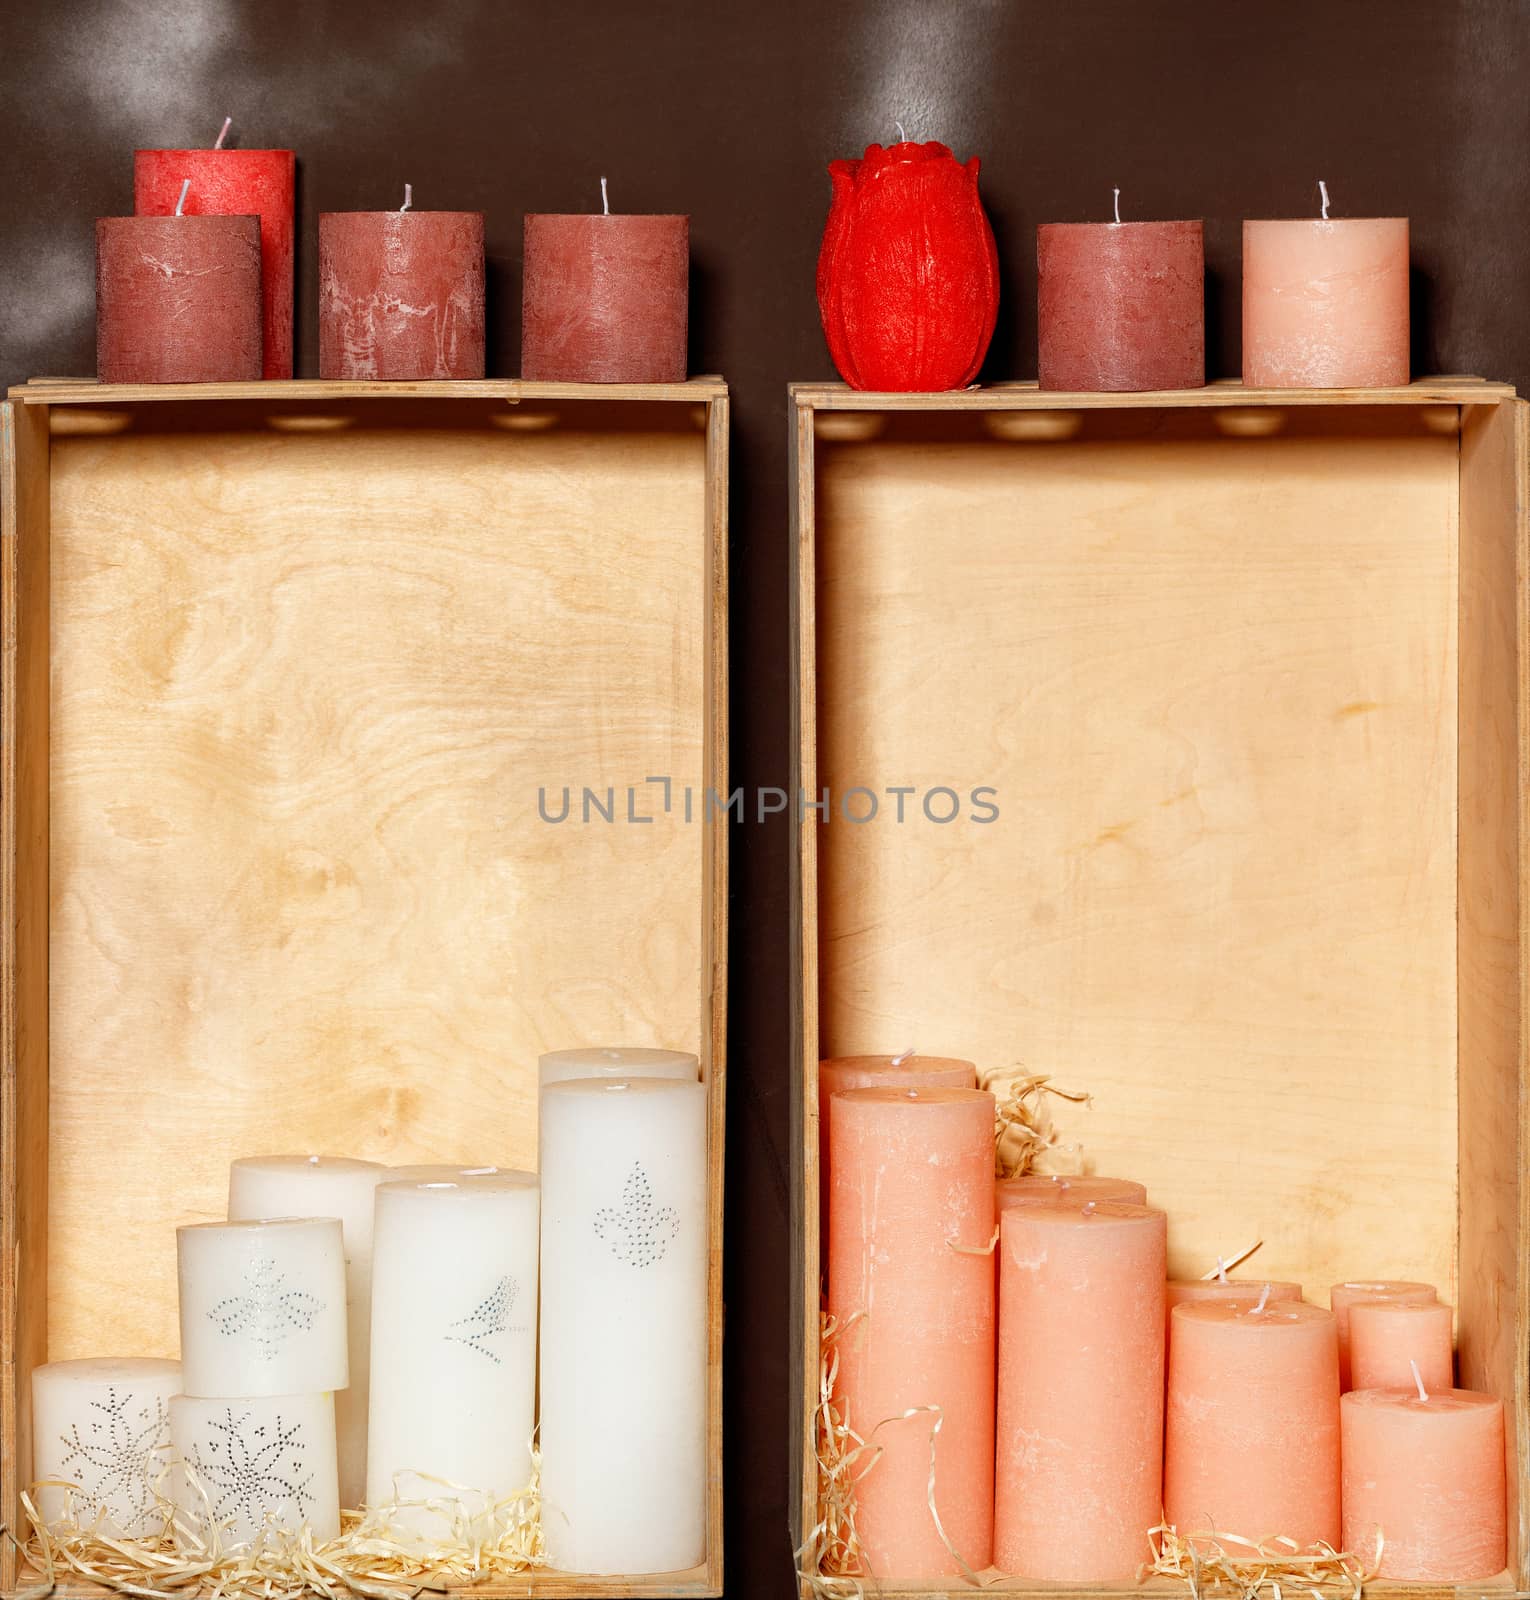 New Year Christmas decorative candles in old wooden boxes standing upright, copy space. by Sergii